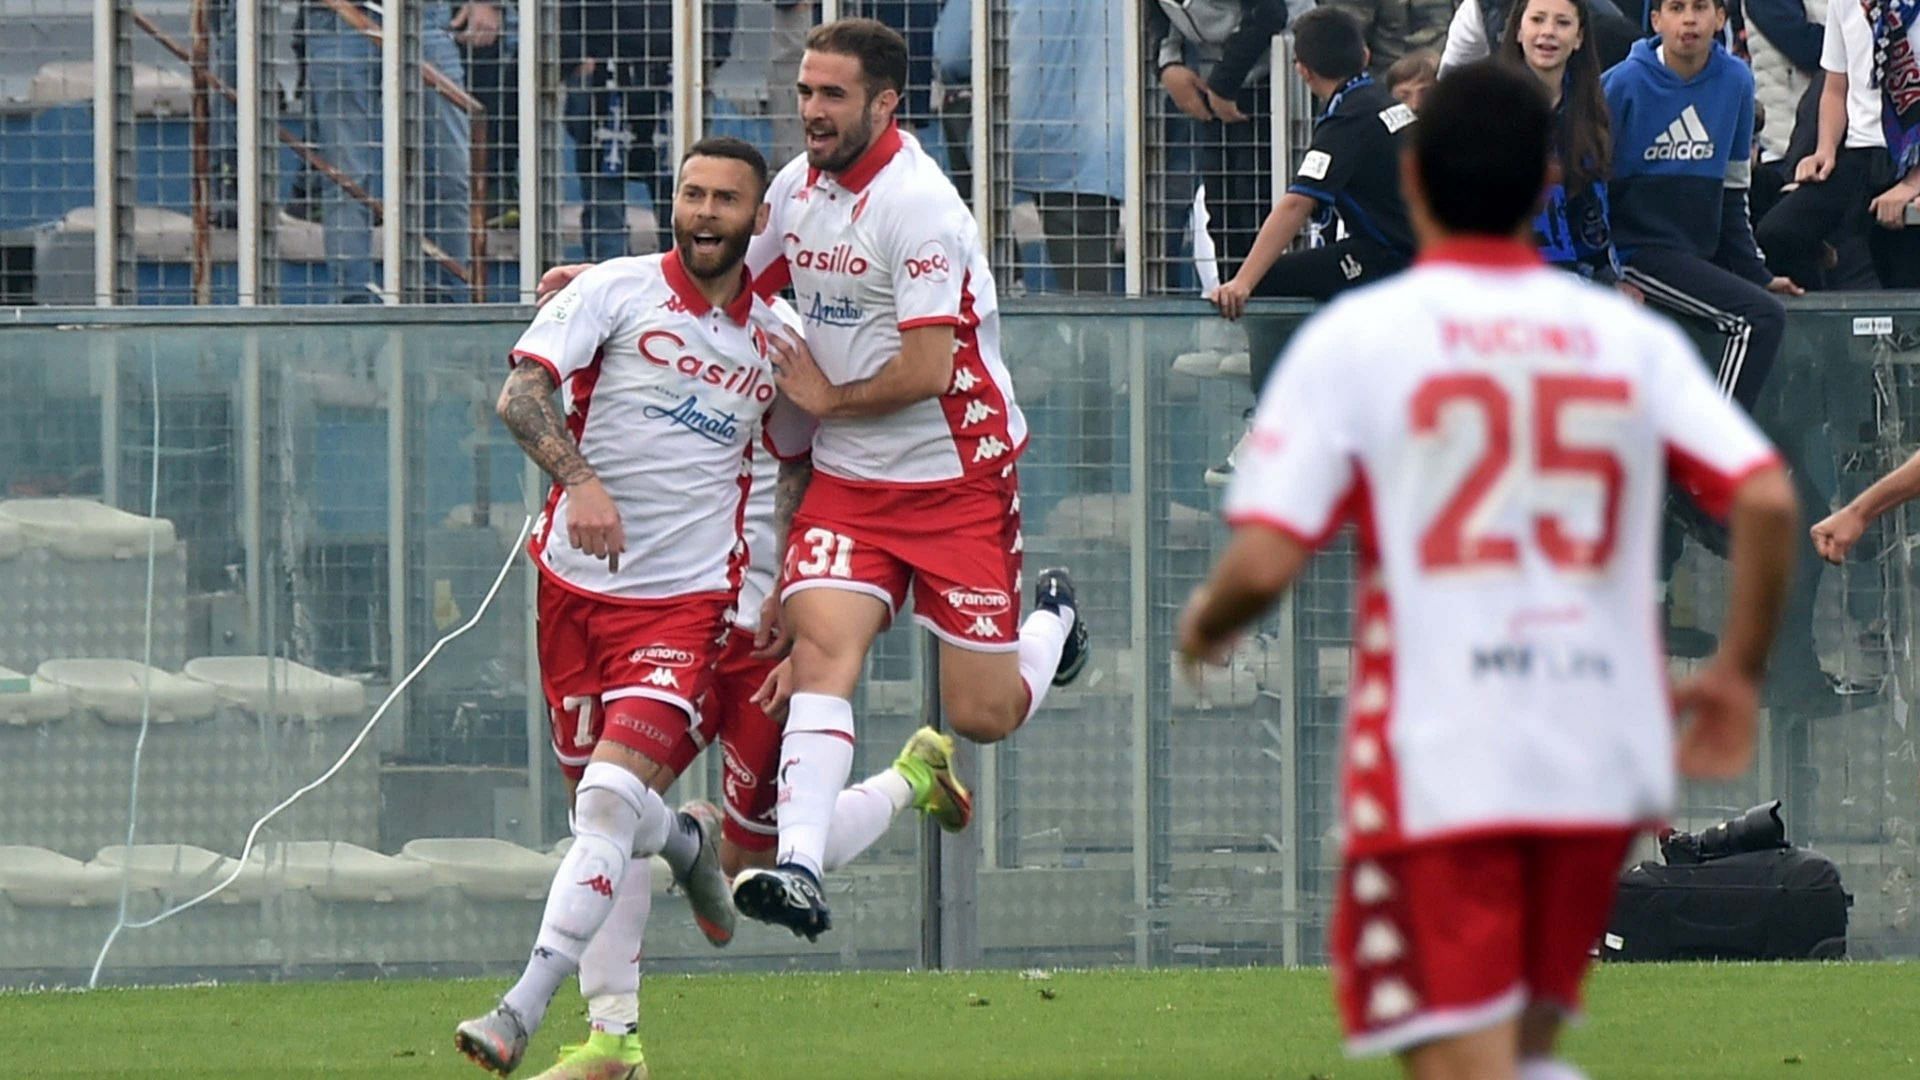 Bari and Sudtirol will meet in the Serie A playoffs on Friday